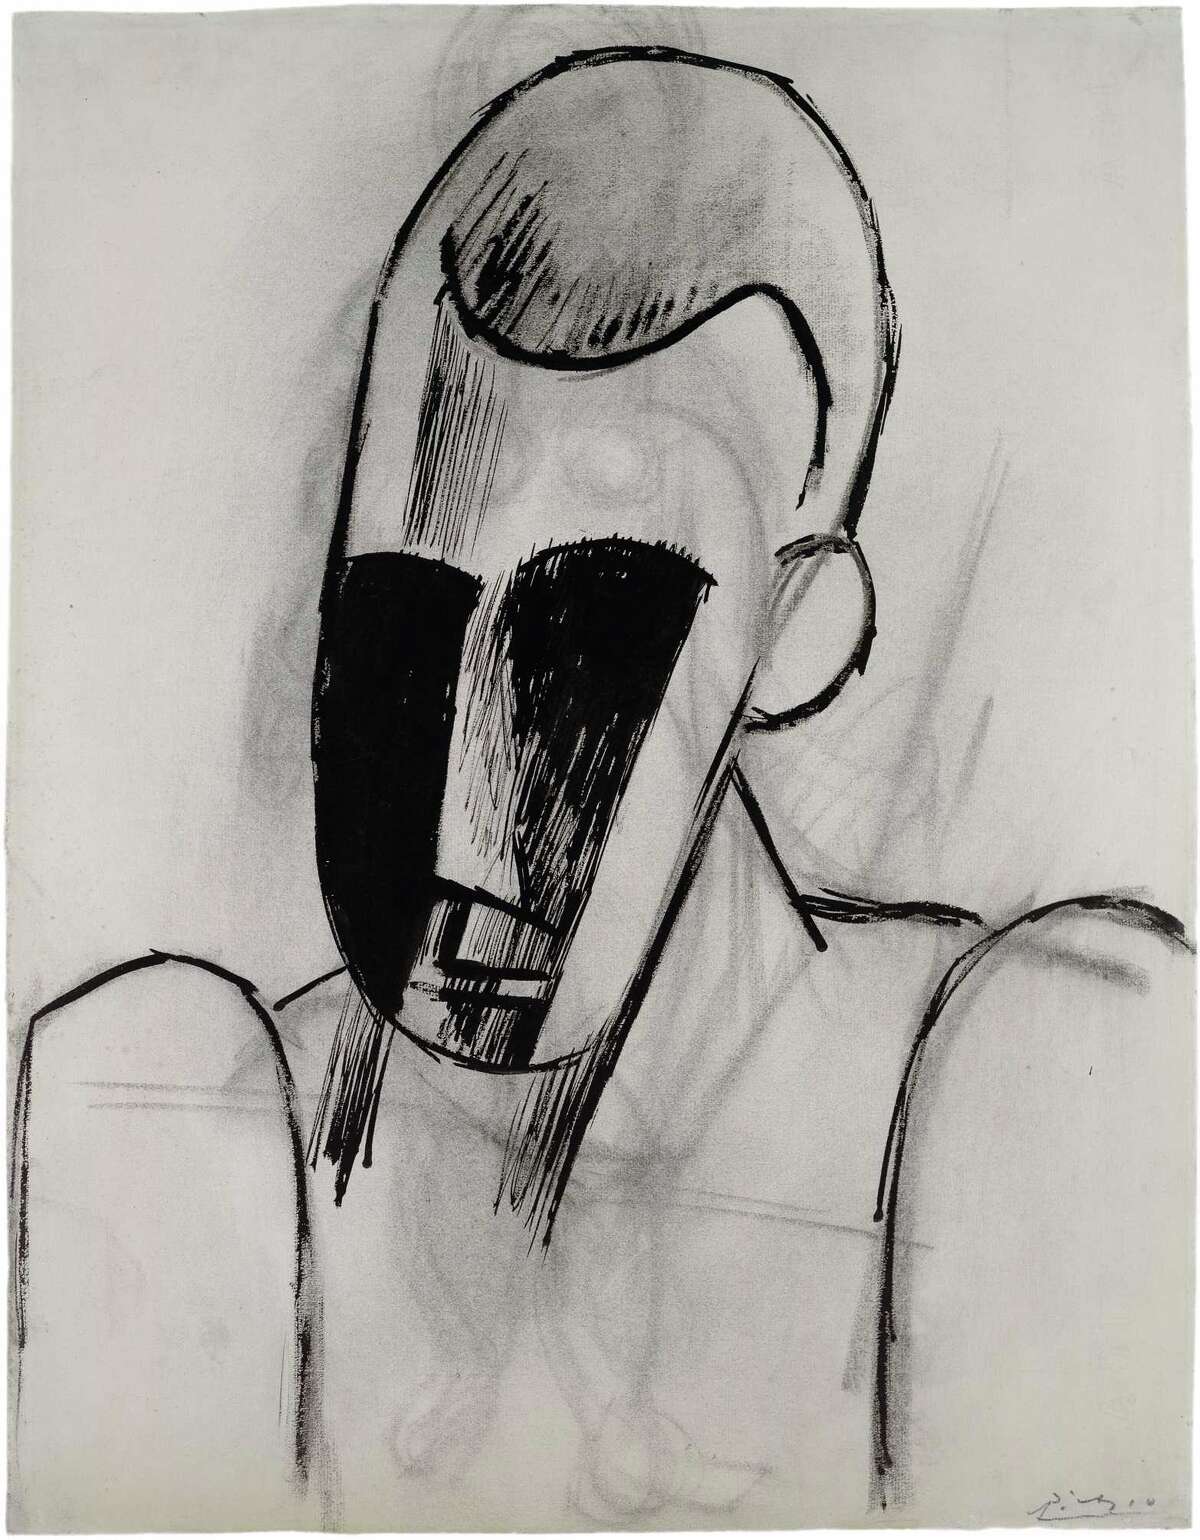 Pablo Picasso, Head of a Man, 1908, ink and charcoal on paper, Private Collection. 2013 Estate of Pablo Picasso / Artists Rights Society (ARS), New York